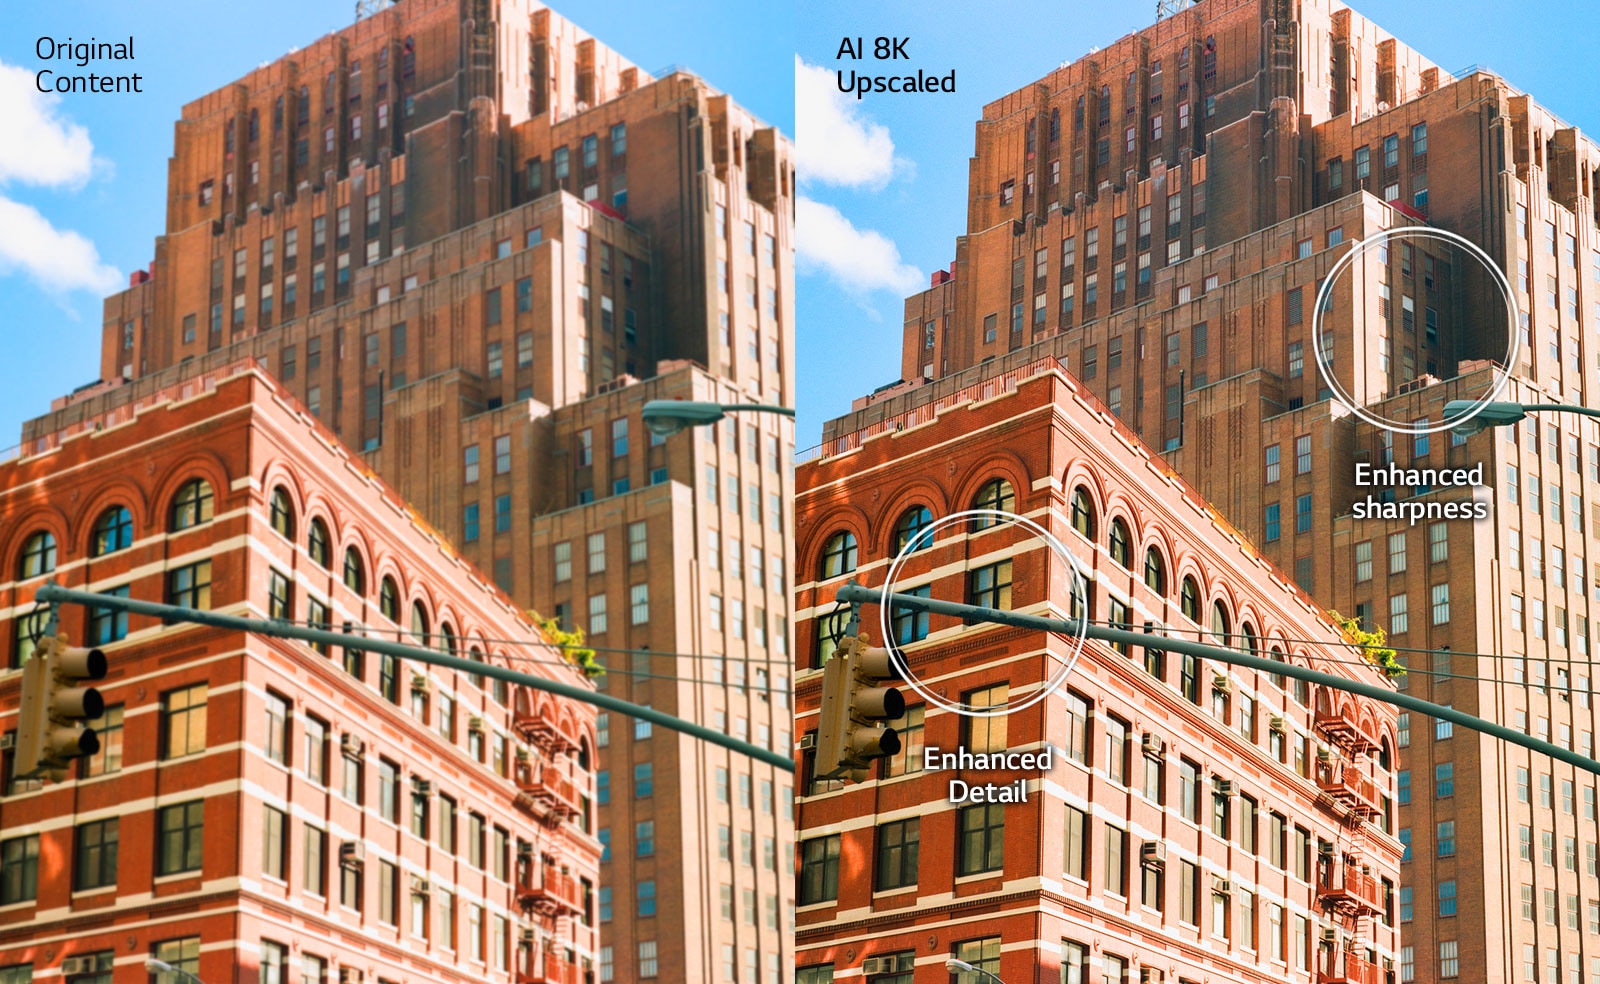 Side by side image of redbrick city buildings. The image on the right is sharper and clearer, showing how the image would be improved with AI 8K upscaling.